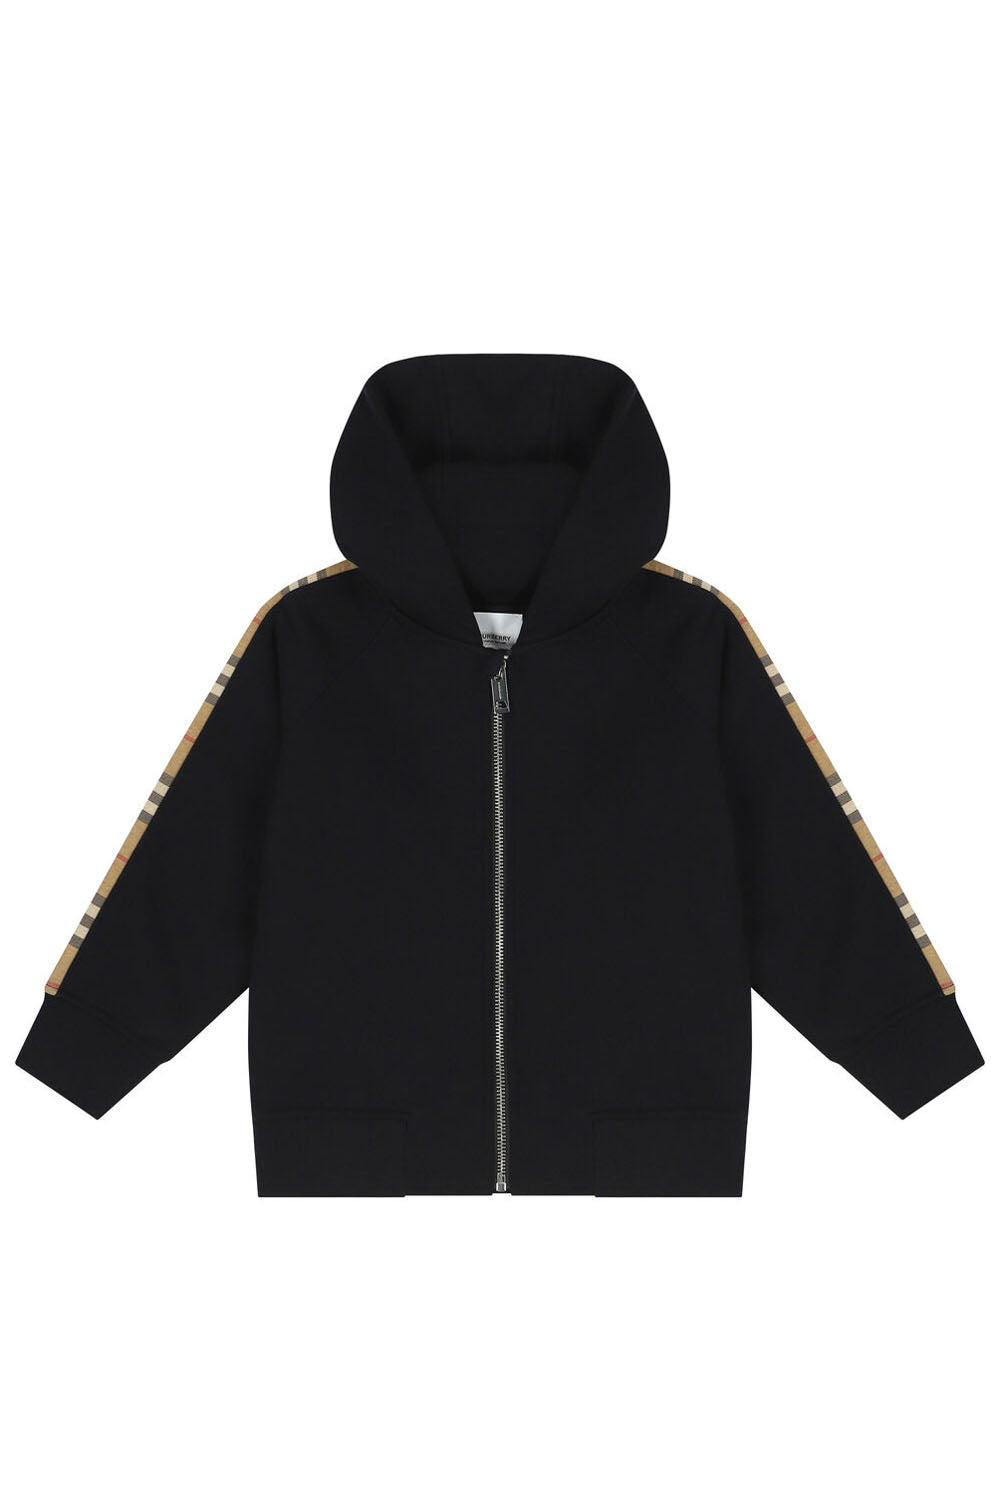 Check Panel Cotton Zip Hoodie for Boys - Maison7